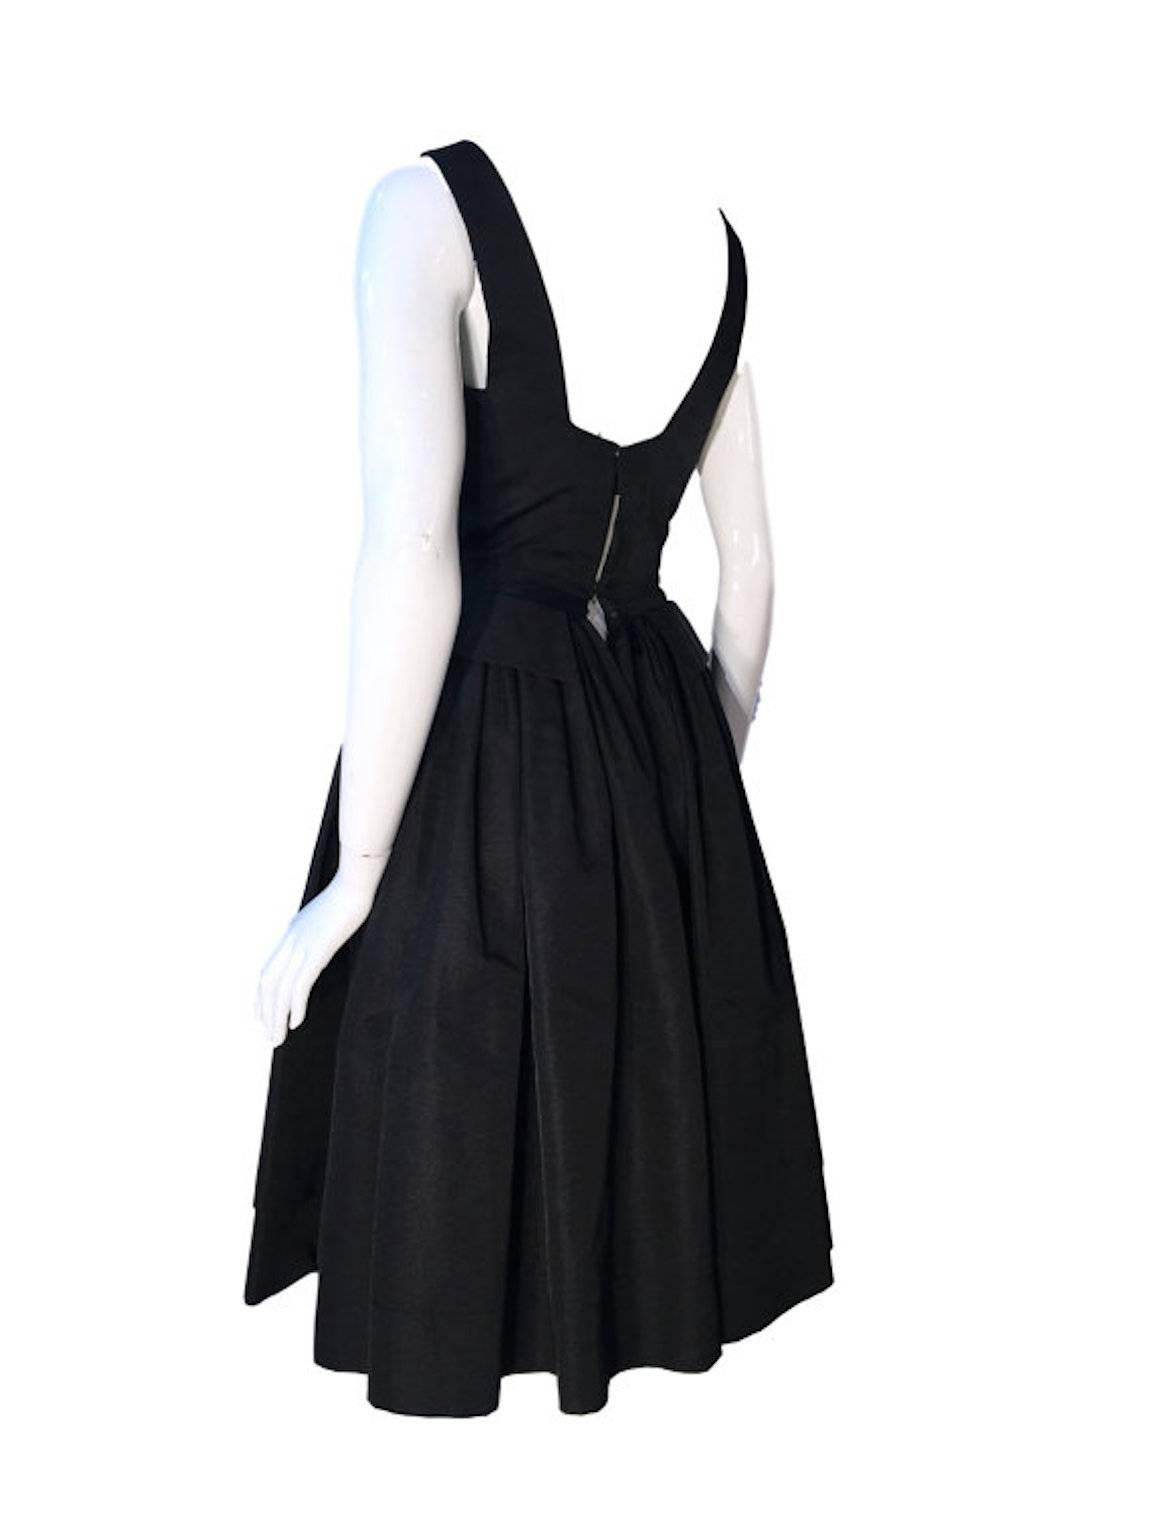 William Travilla 1950s vintage dress, made from black grosgrain silk, lined with silk chiffon, nipped in waist and flared skirt. Has bow trim on each strap on top of bust line.

Back popper and hook/eye fastening, a bit tight on the